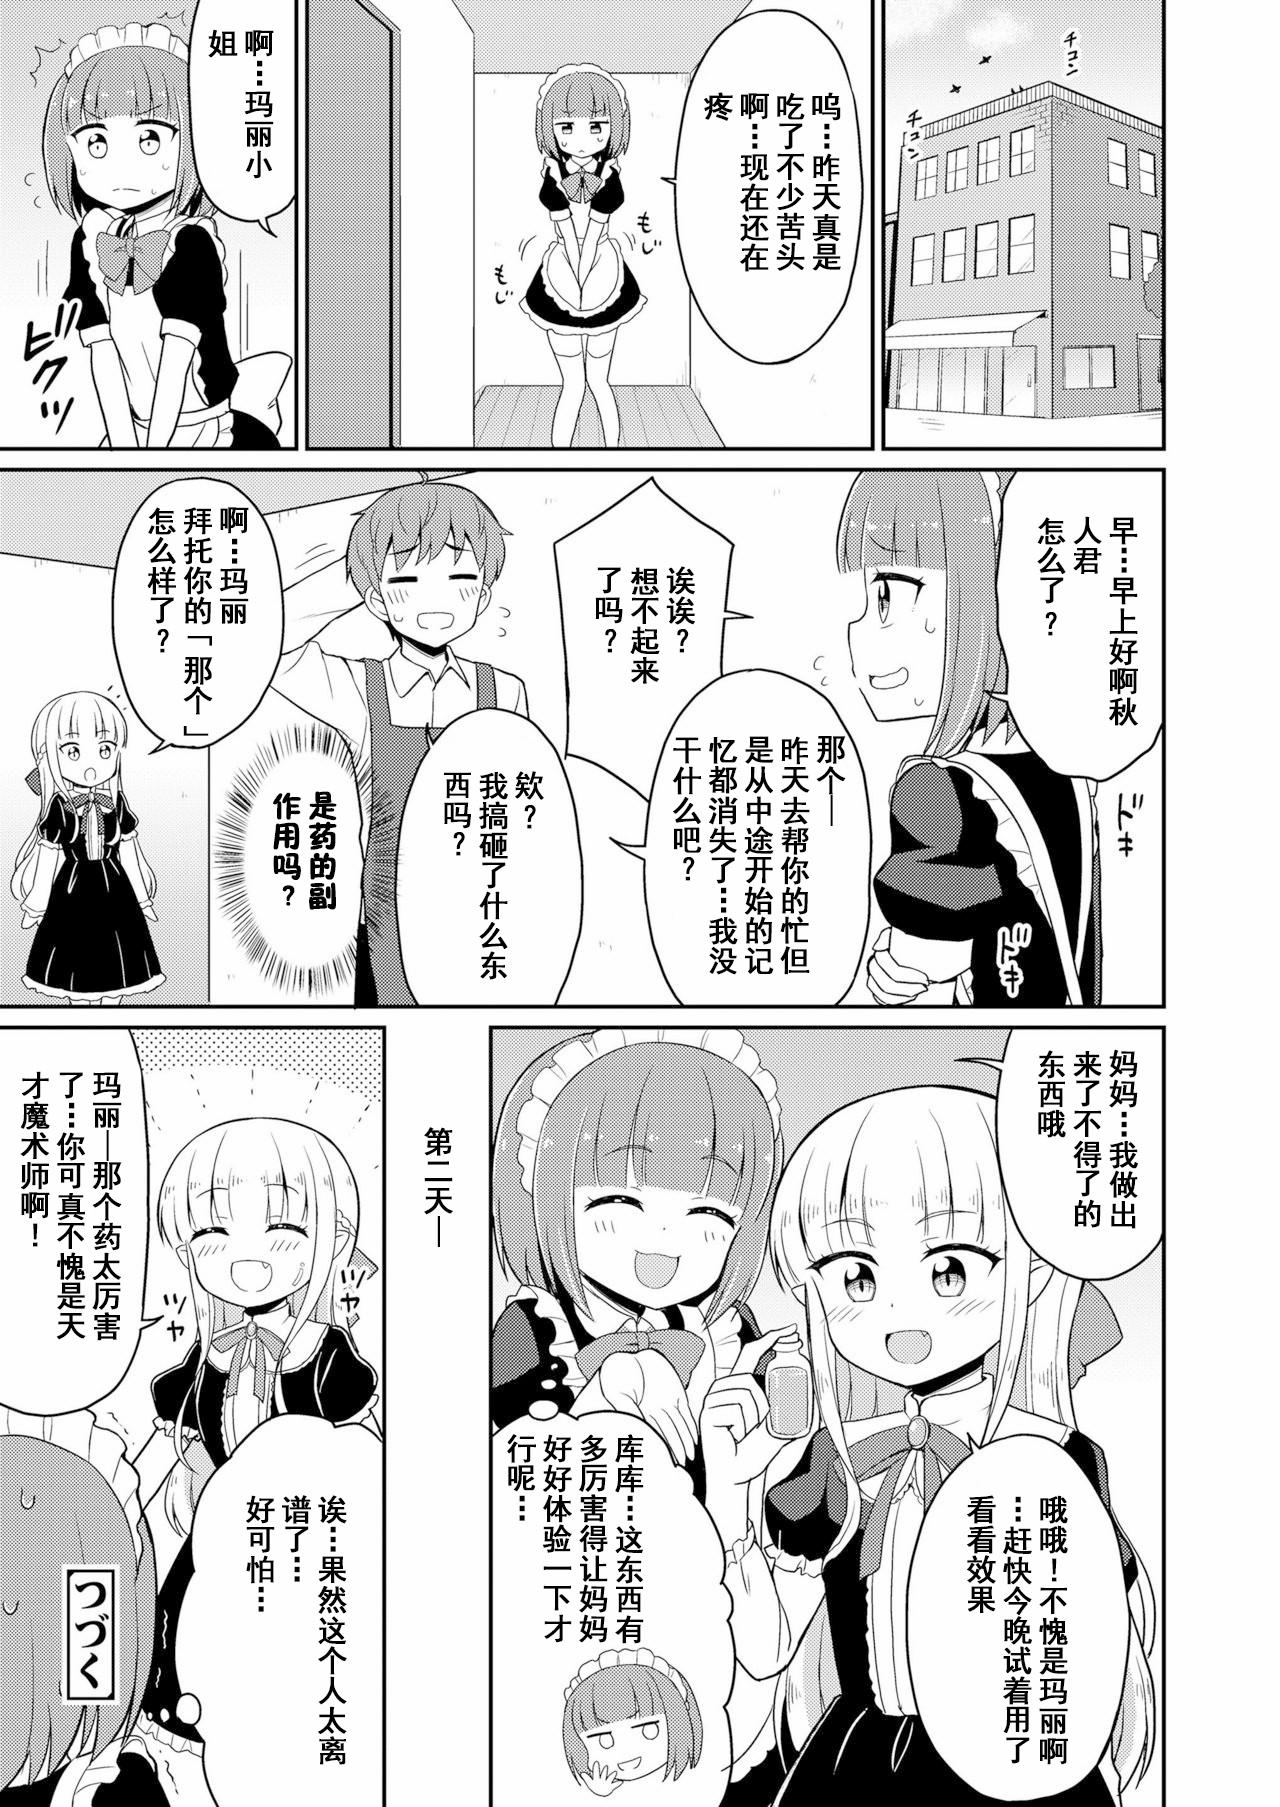 Belly Cafe Eternal e Youkoso! Ch. 5 | 欢迎来到永远咖啡厅！第五话 Wild - Page 25